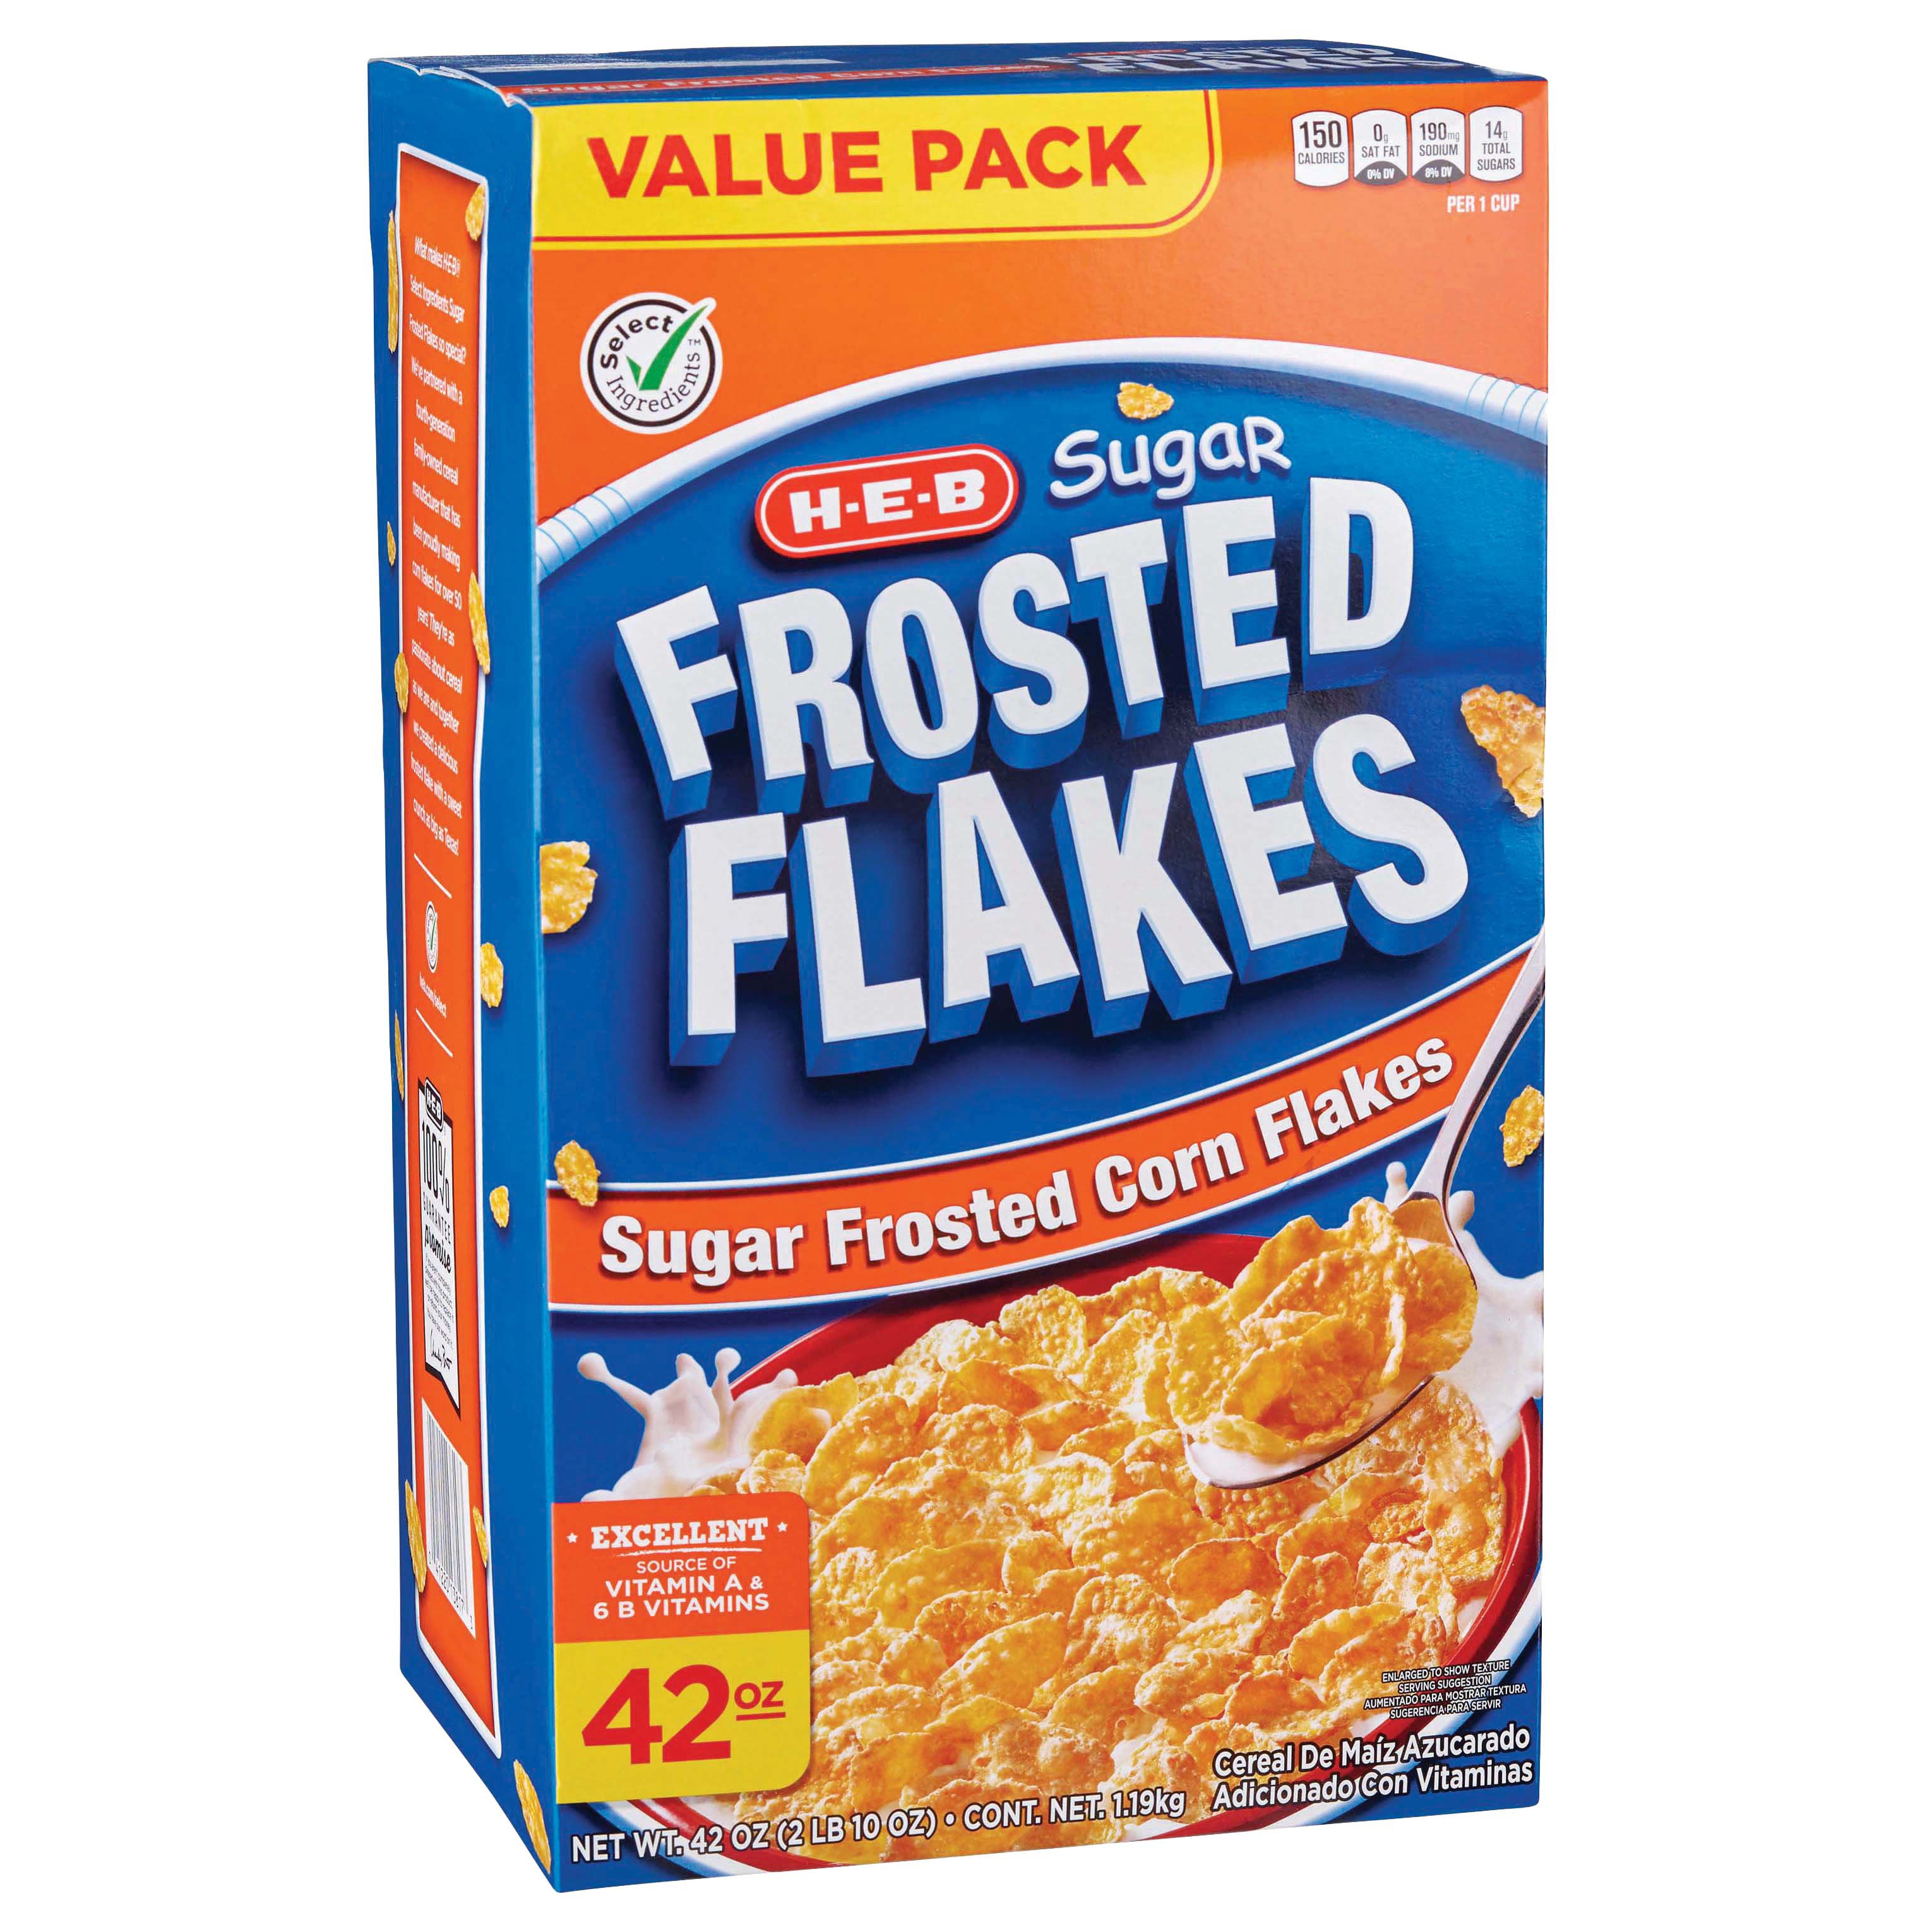 Kellogg's Frosted Flakes Chocolate Milkshake Family Size - Shop Cereal at  H-E-B